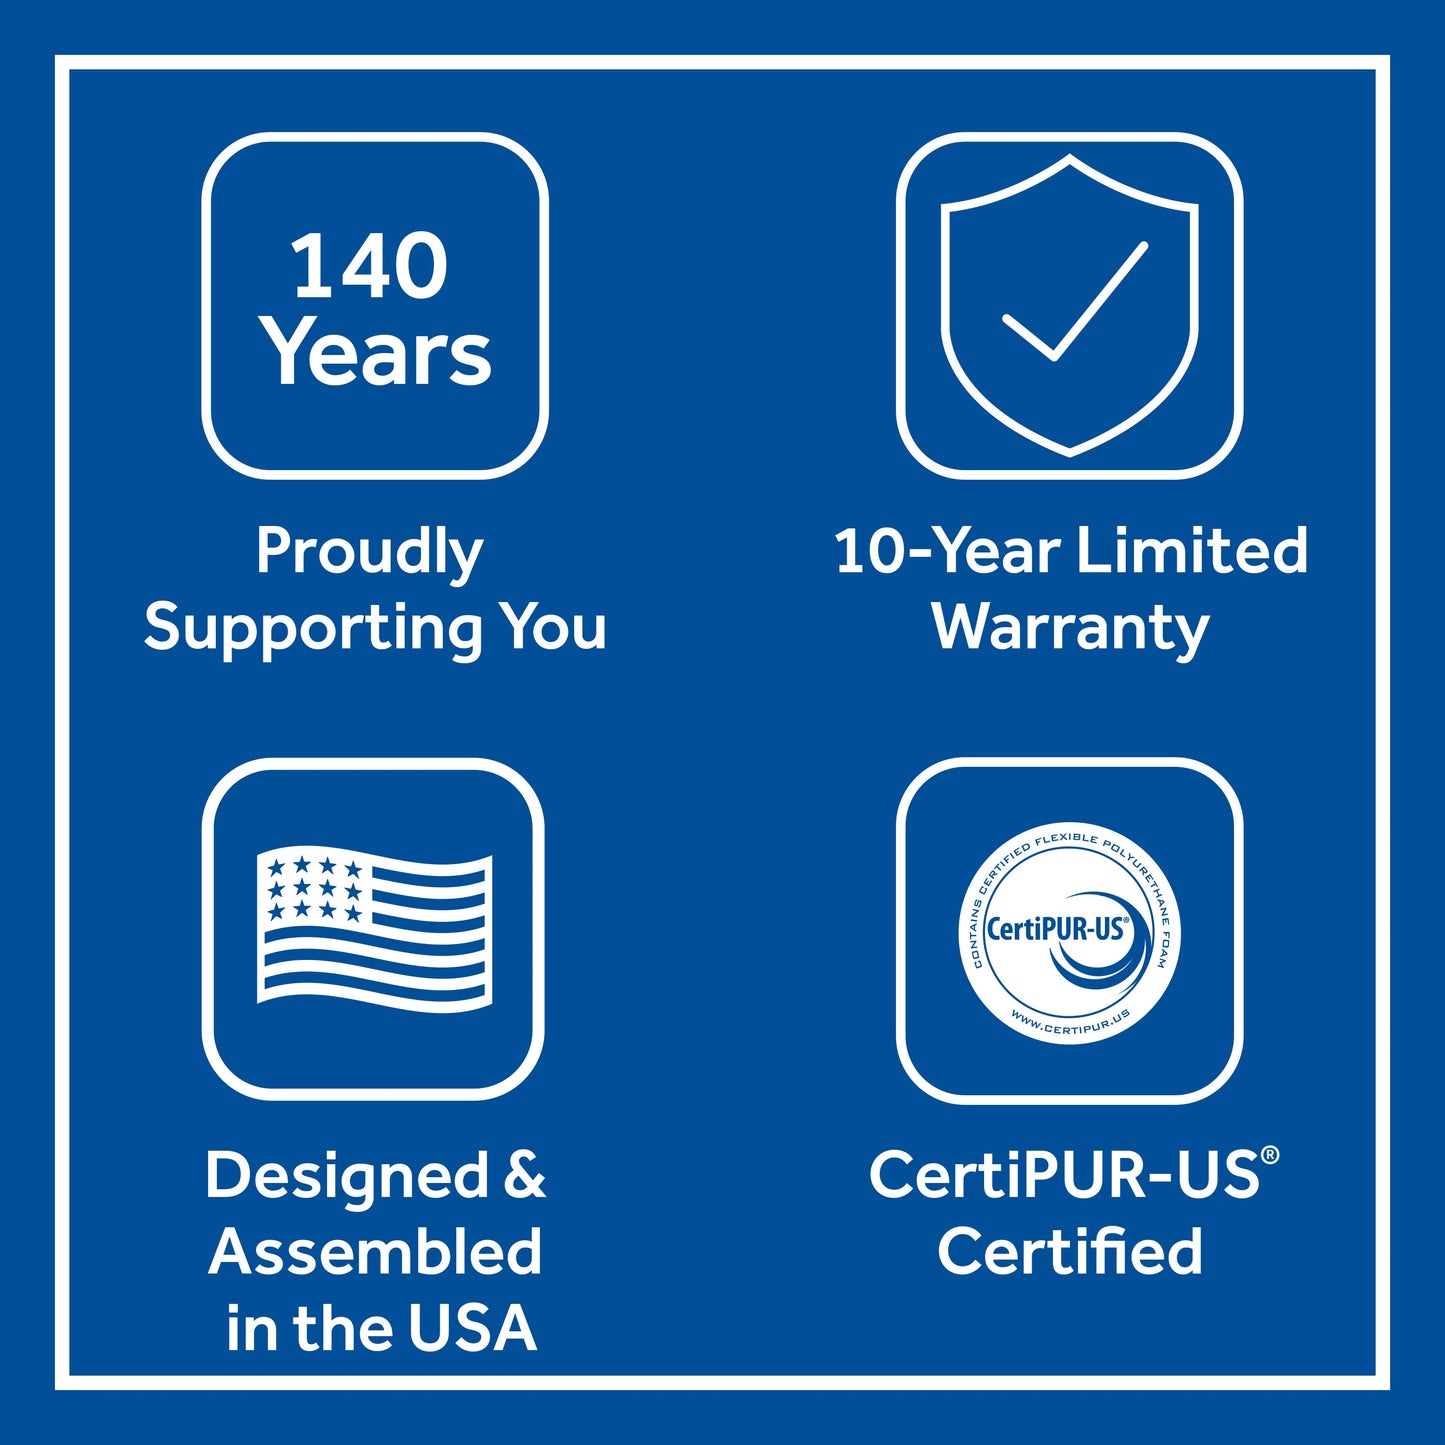 Sealy High Point Soft Hybrid Mattress Features; Proudly supporting you, 10 year limited warranty, designed and assembled in the USA, CertiPUR-US Certified